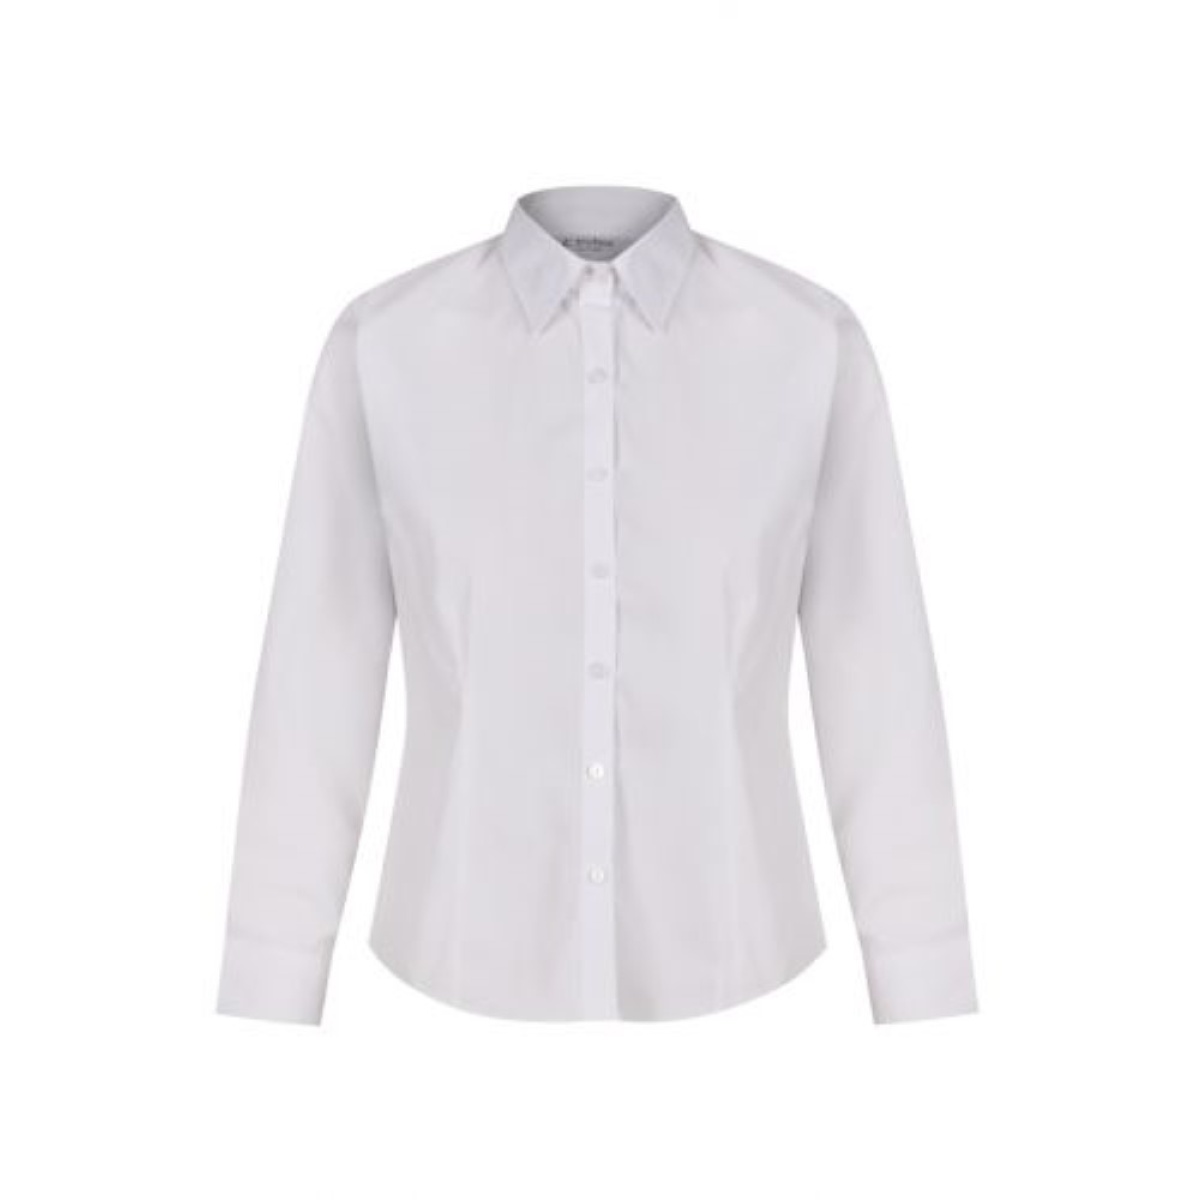 Blouse - White - Twin Pack - Long Sleeve - Trutex, James Hornsby School, Beauchamps High School, Shirts & Blouses, Castle View School, Cornelius Vermuyden